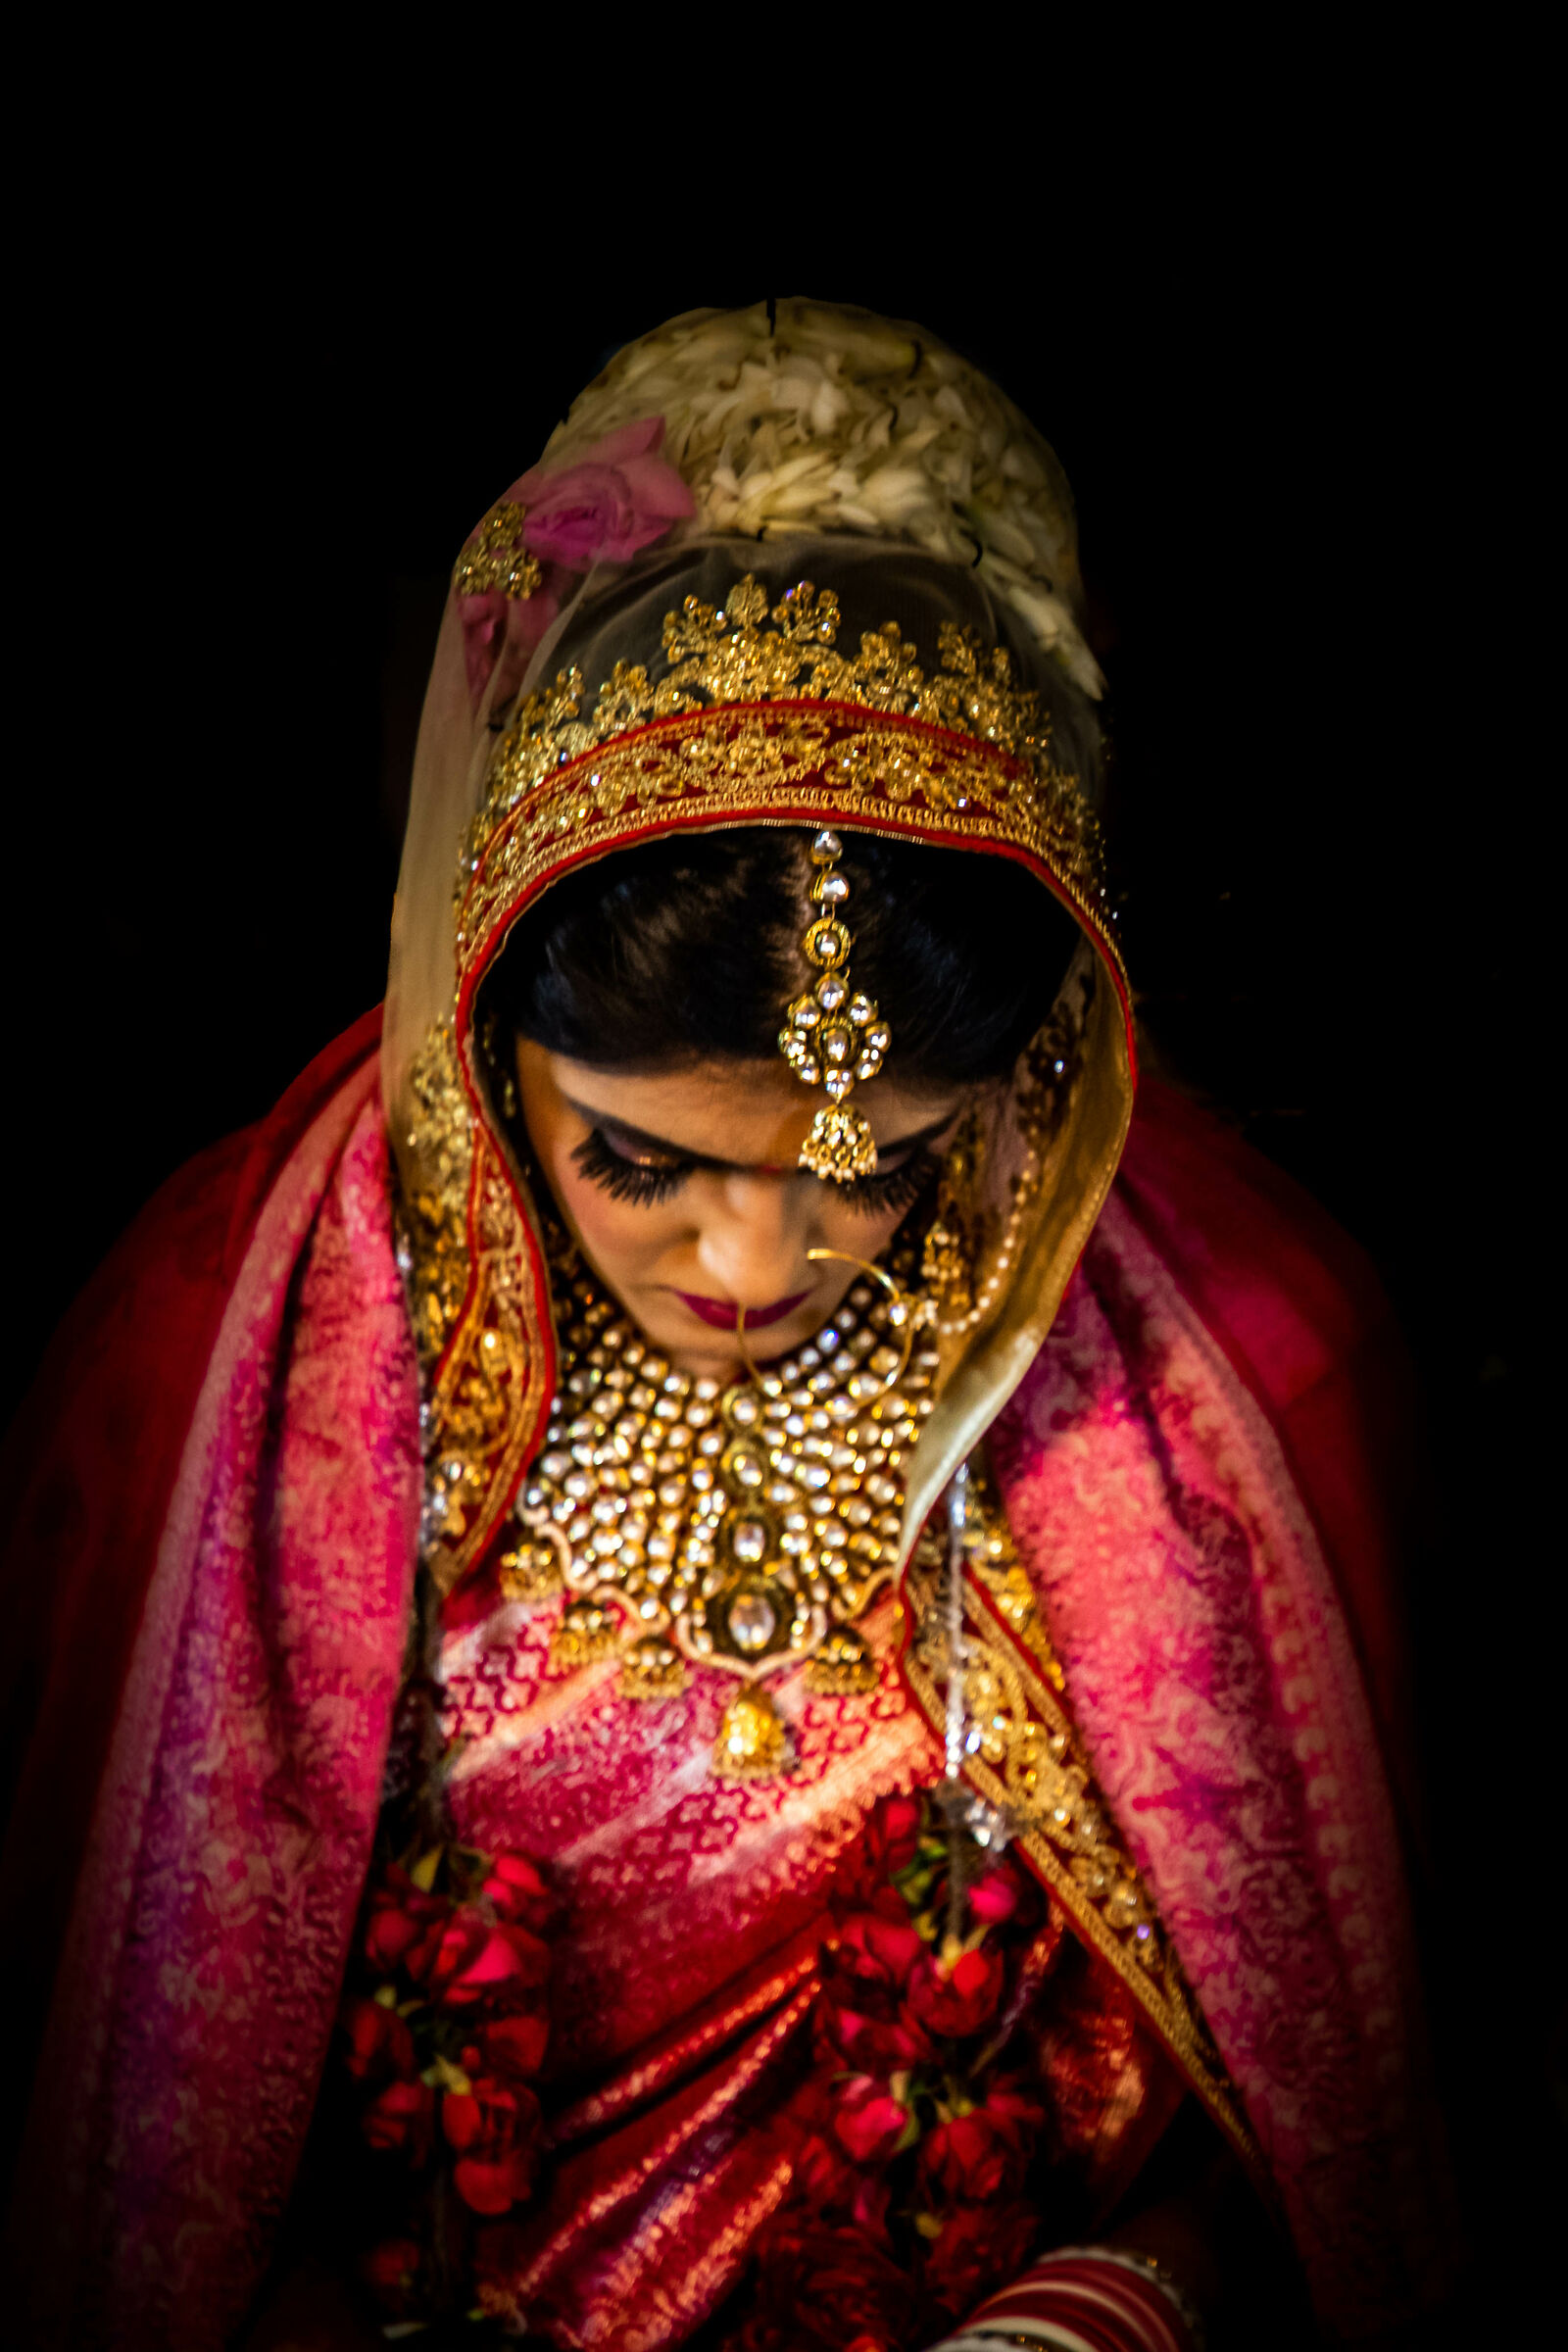 The Indian Bride...